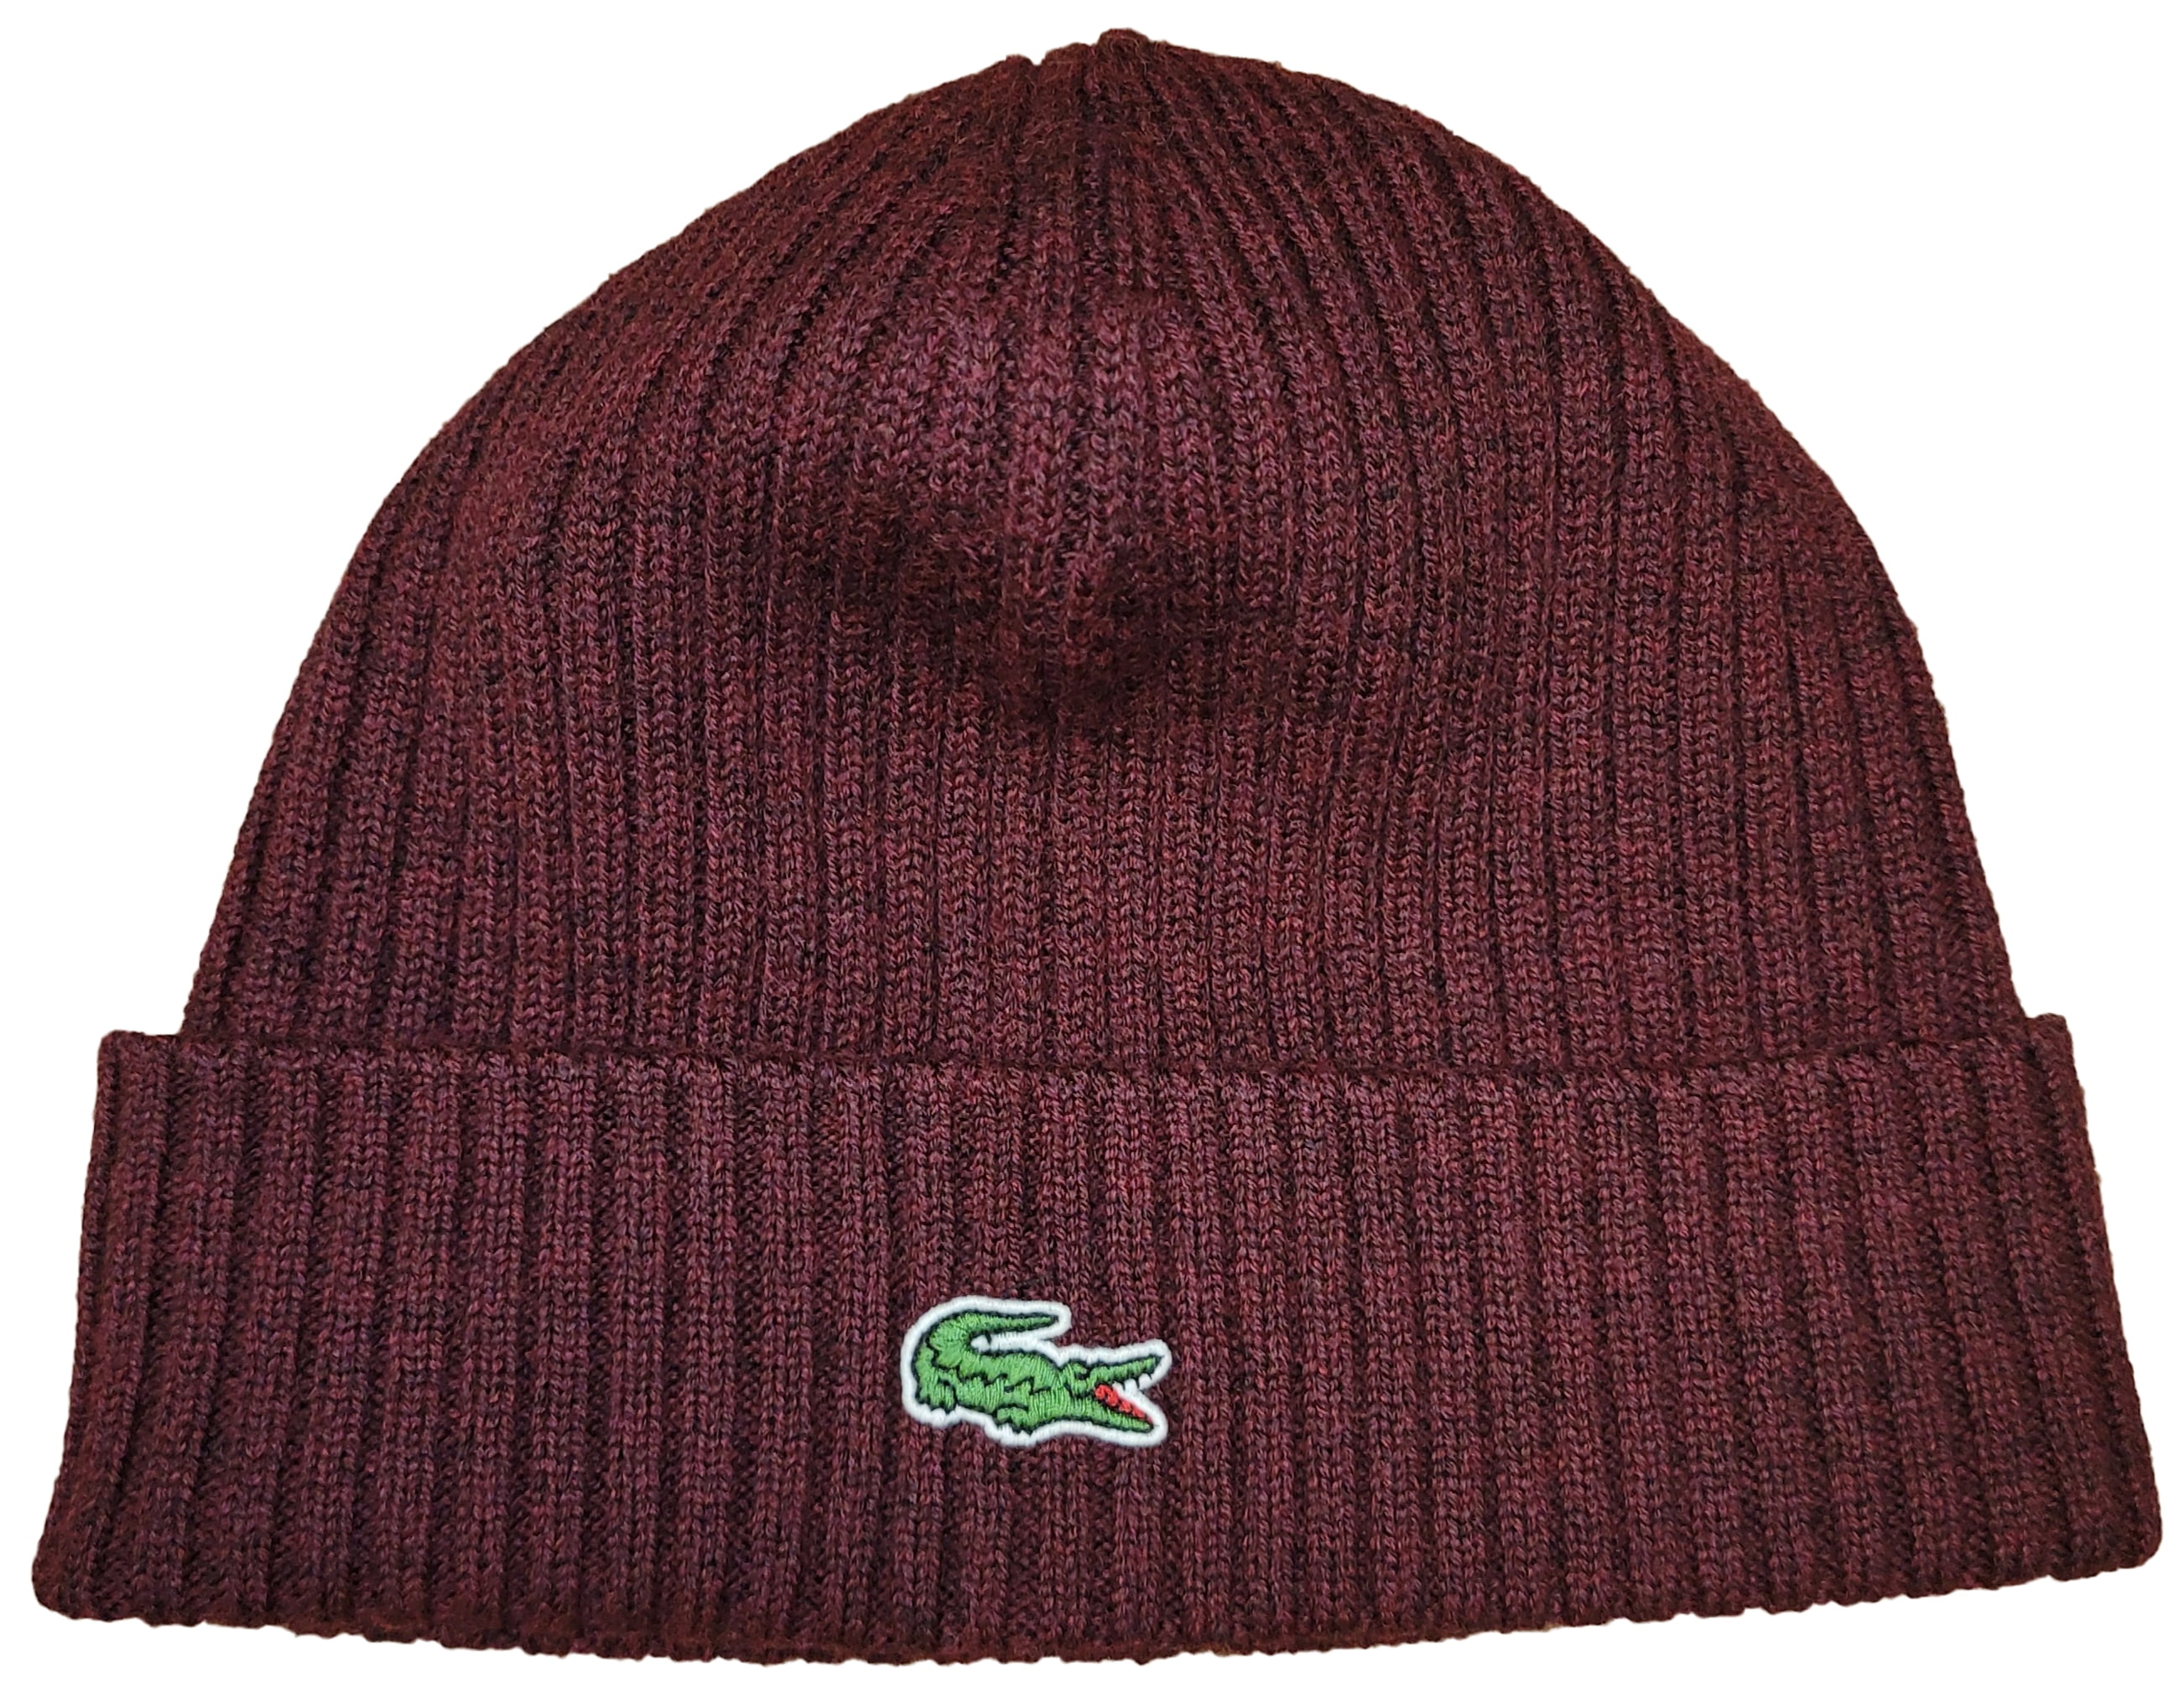 Men's Lacoste Ribbed Wool Beanie - -